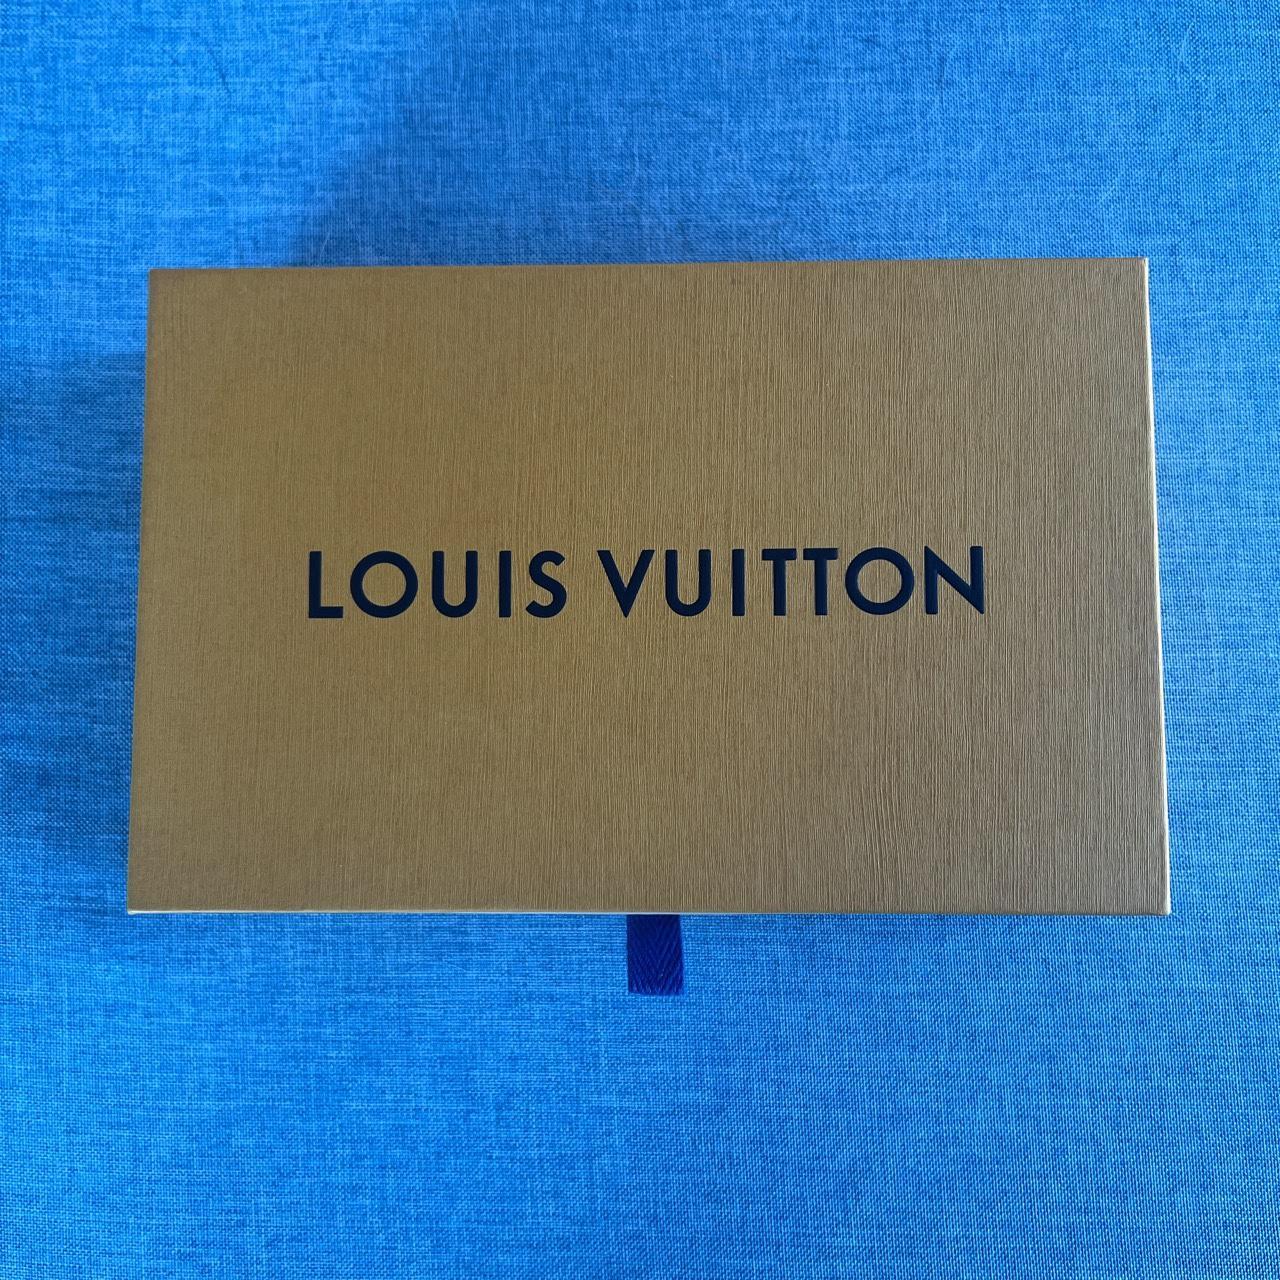 louis vuitton slippers size 5.5 fits 5.5 to 6 - Depop